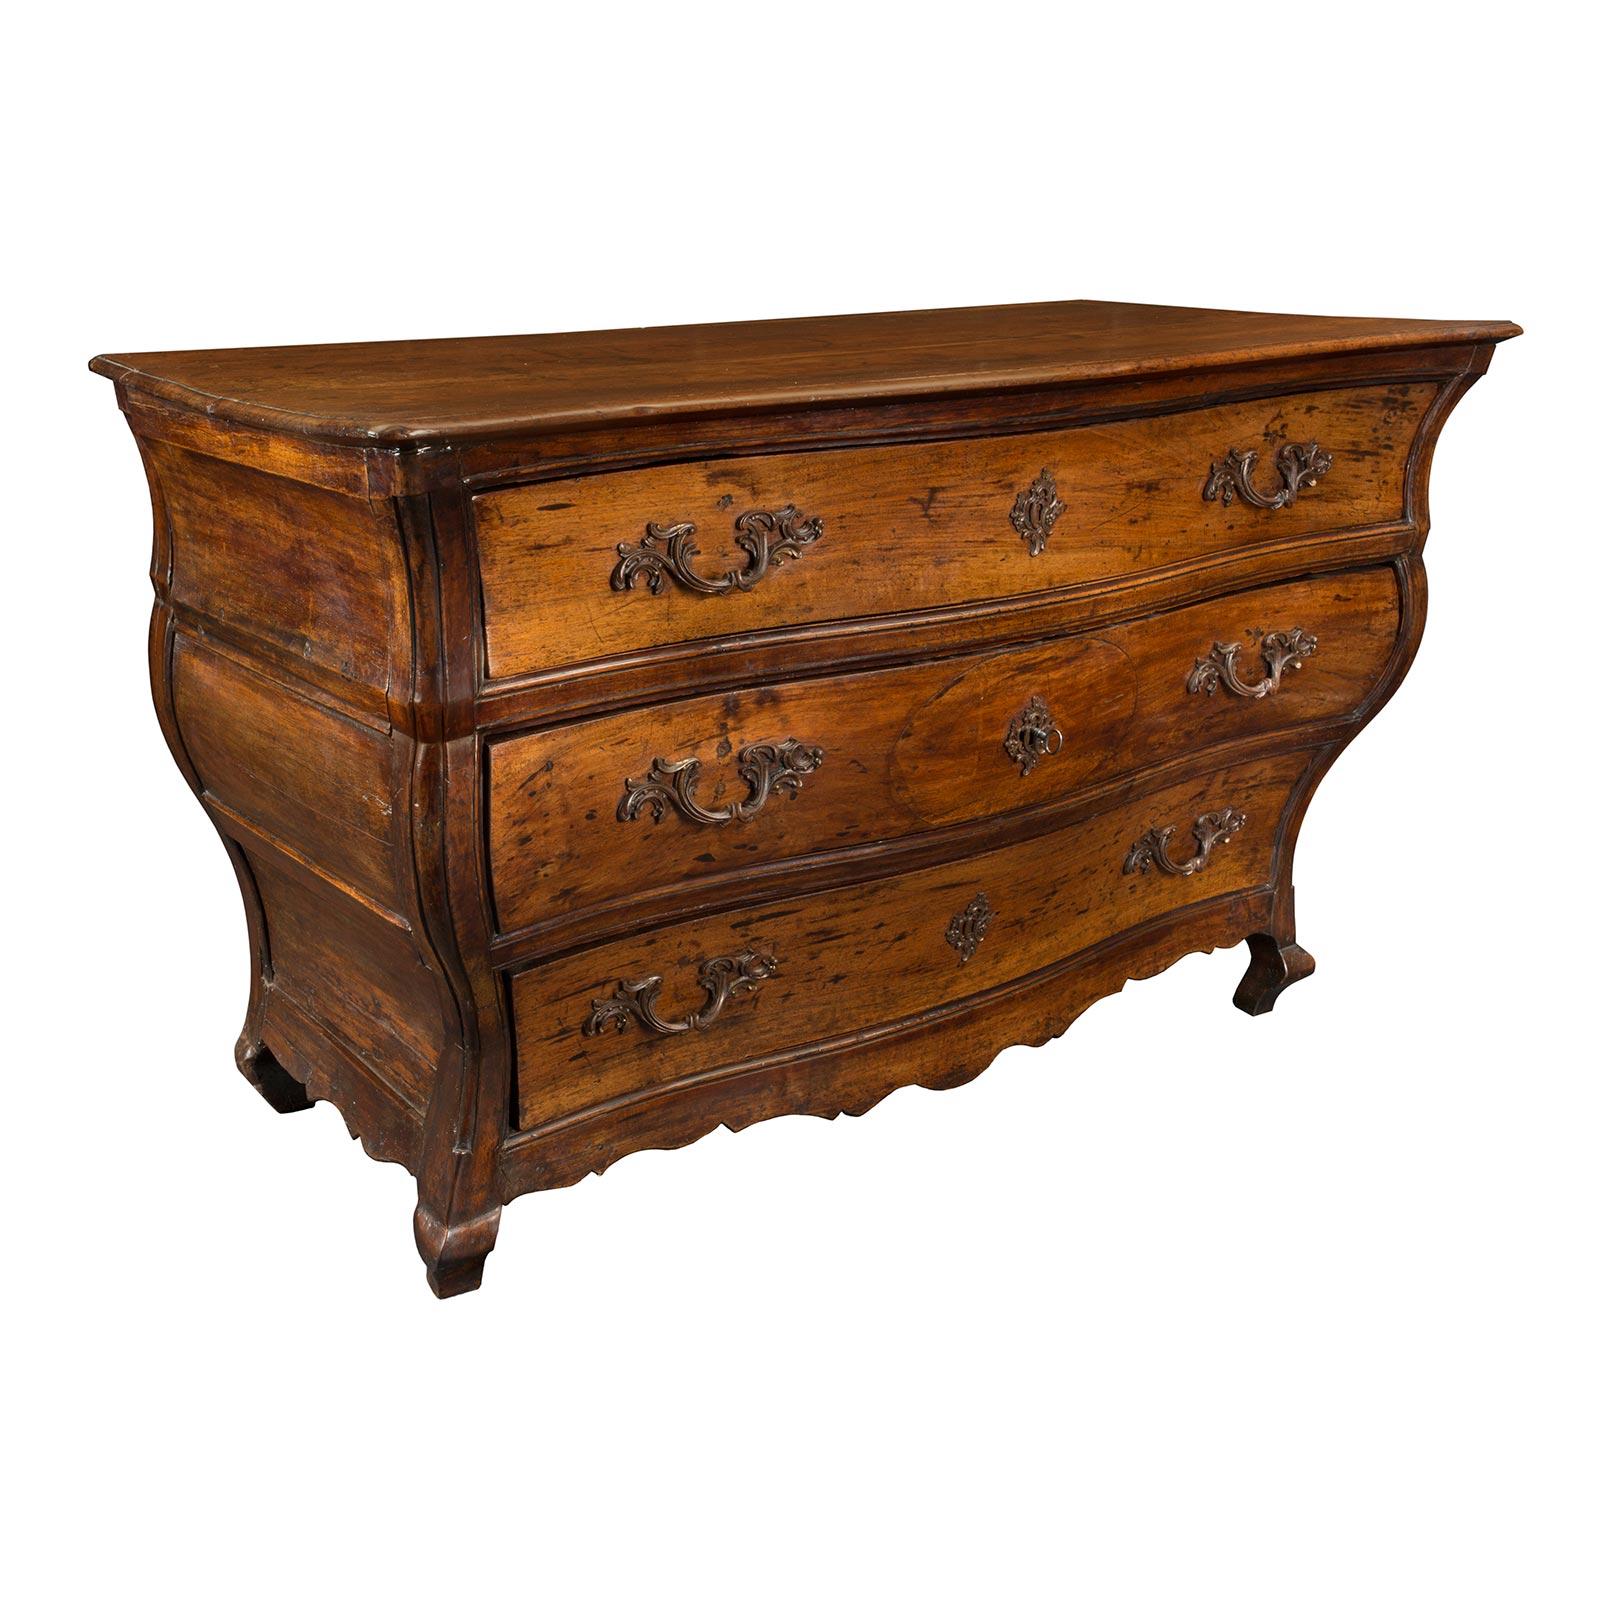 French 18th Century Louis XV Period Walnut Commode Bordelaise In Good Condition For Sale In West Palm Beach, FL